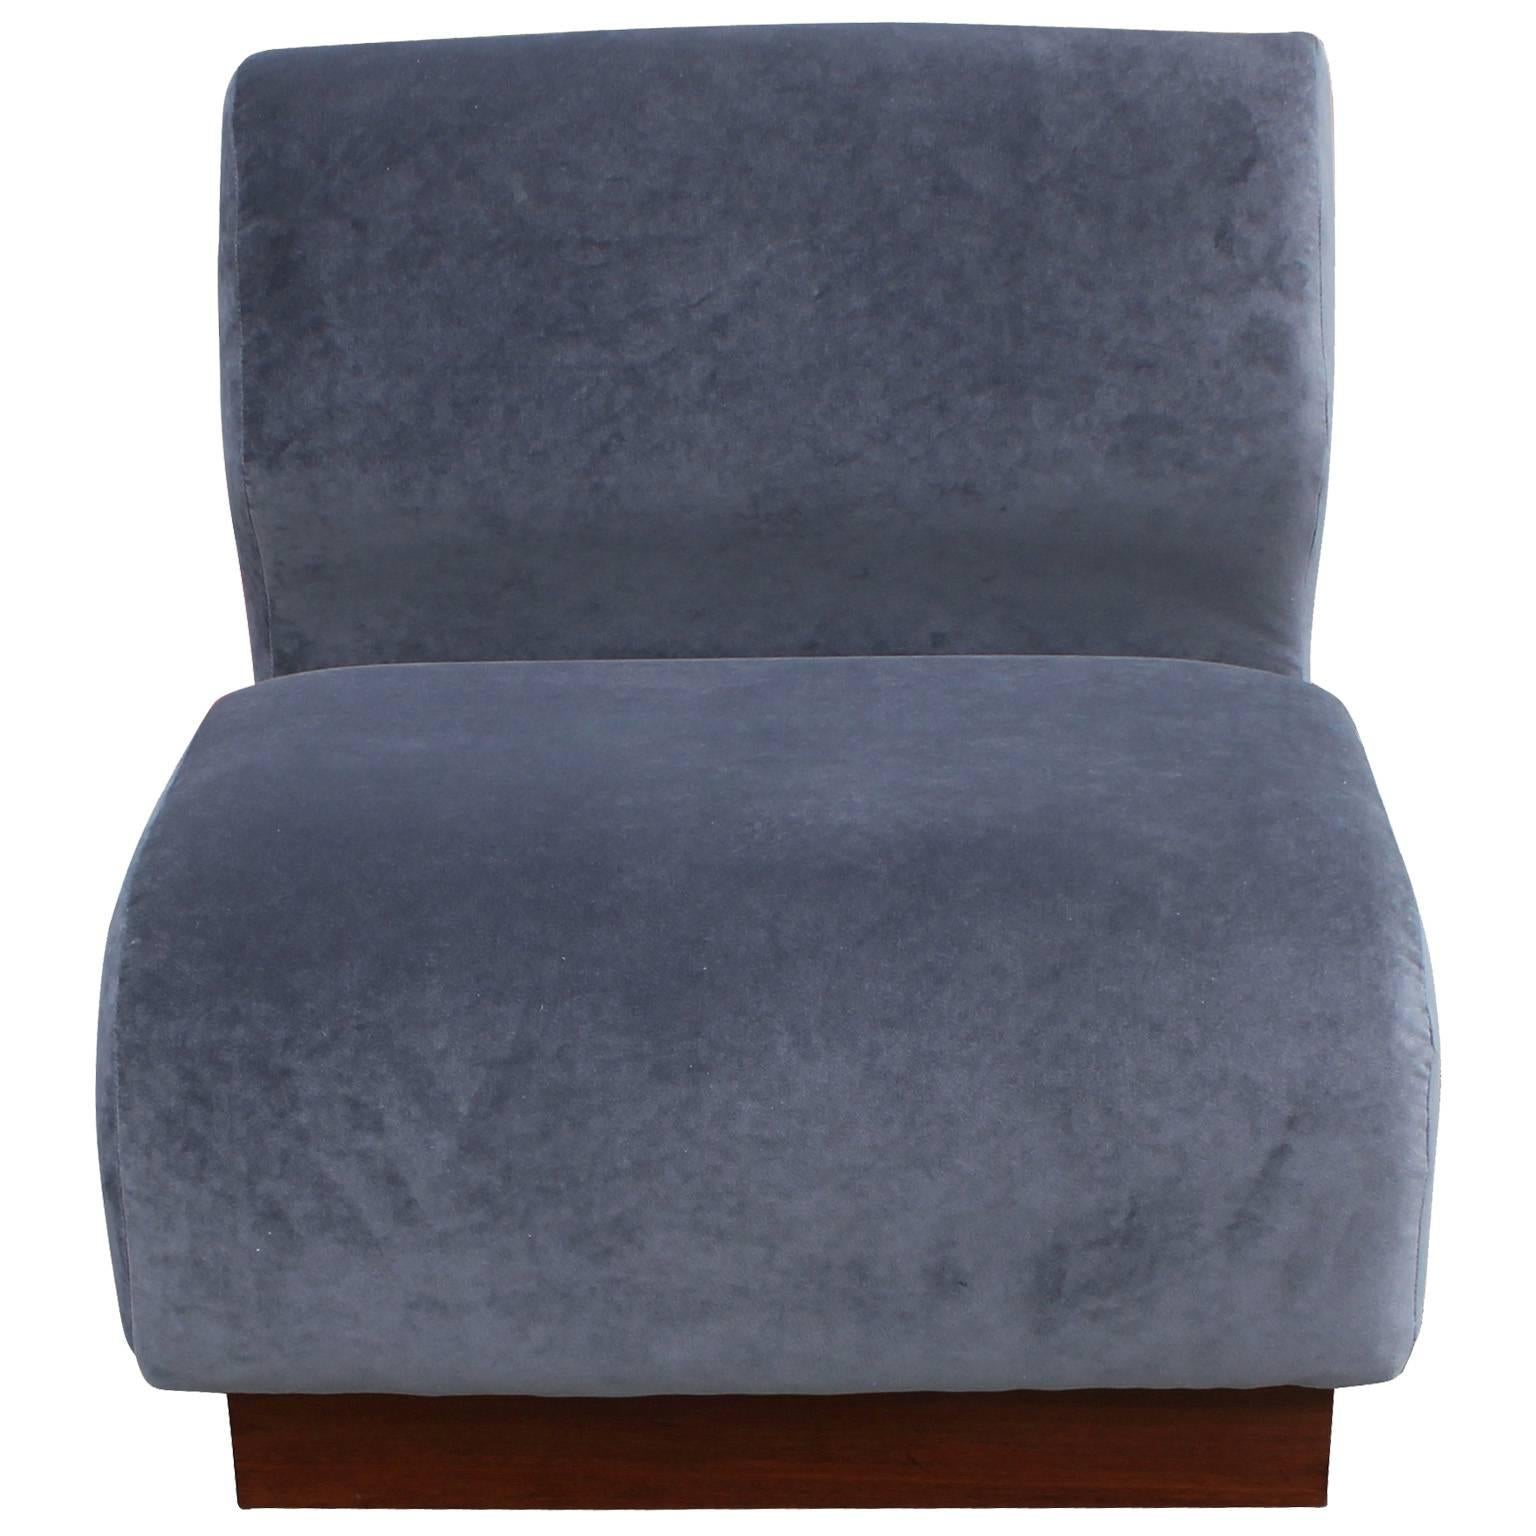 Excellent pair of convertible slipper chairs. Chairs can be pushed together to for a love seat or used separately as slipper chairs. Chairs have fantastic organically curved profiles. Freshly upholstered in a supple grey velvet with a medium walnut